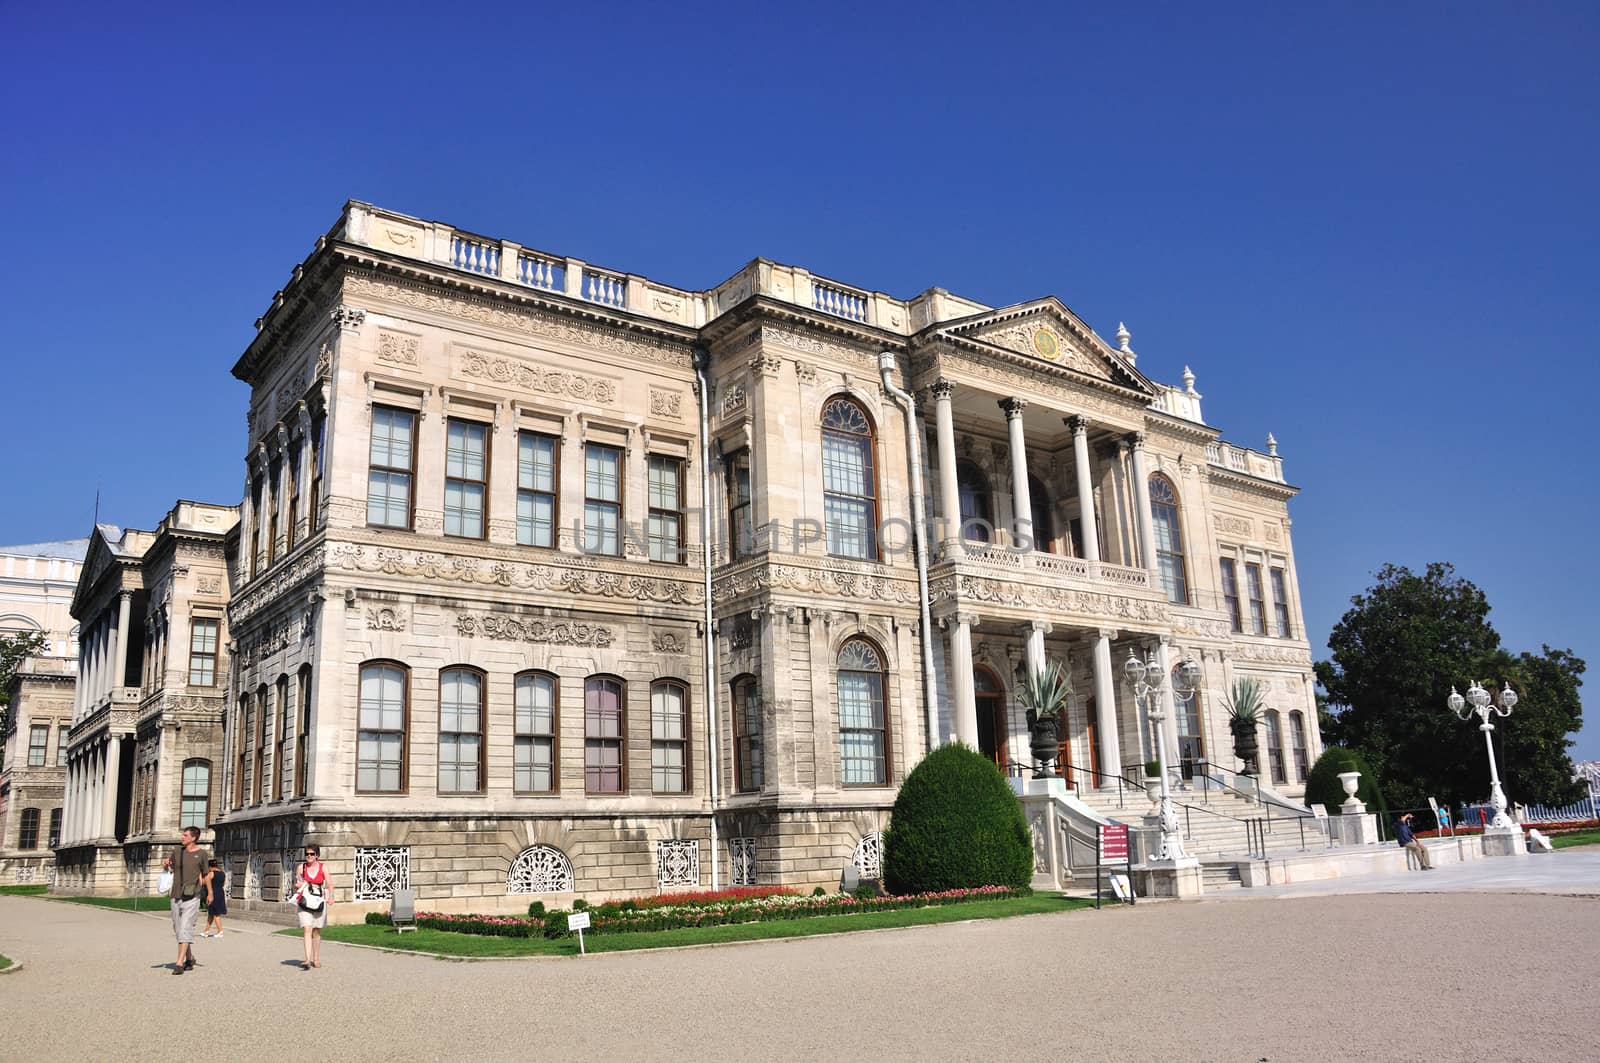 Dolmabahce Palace in Istanbul, Turkey, in old Ottoman style